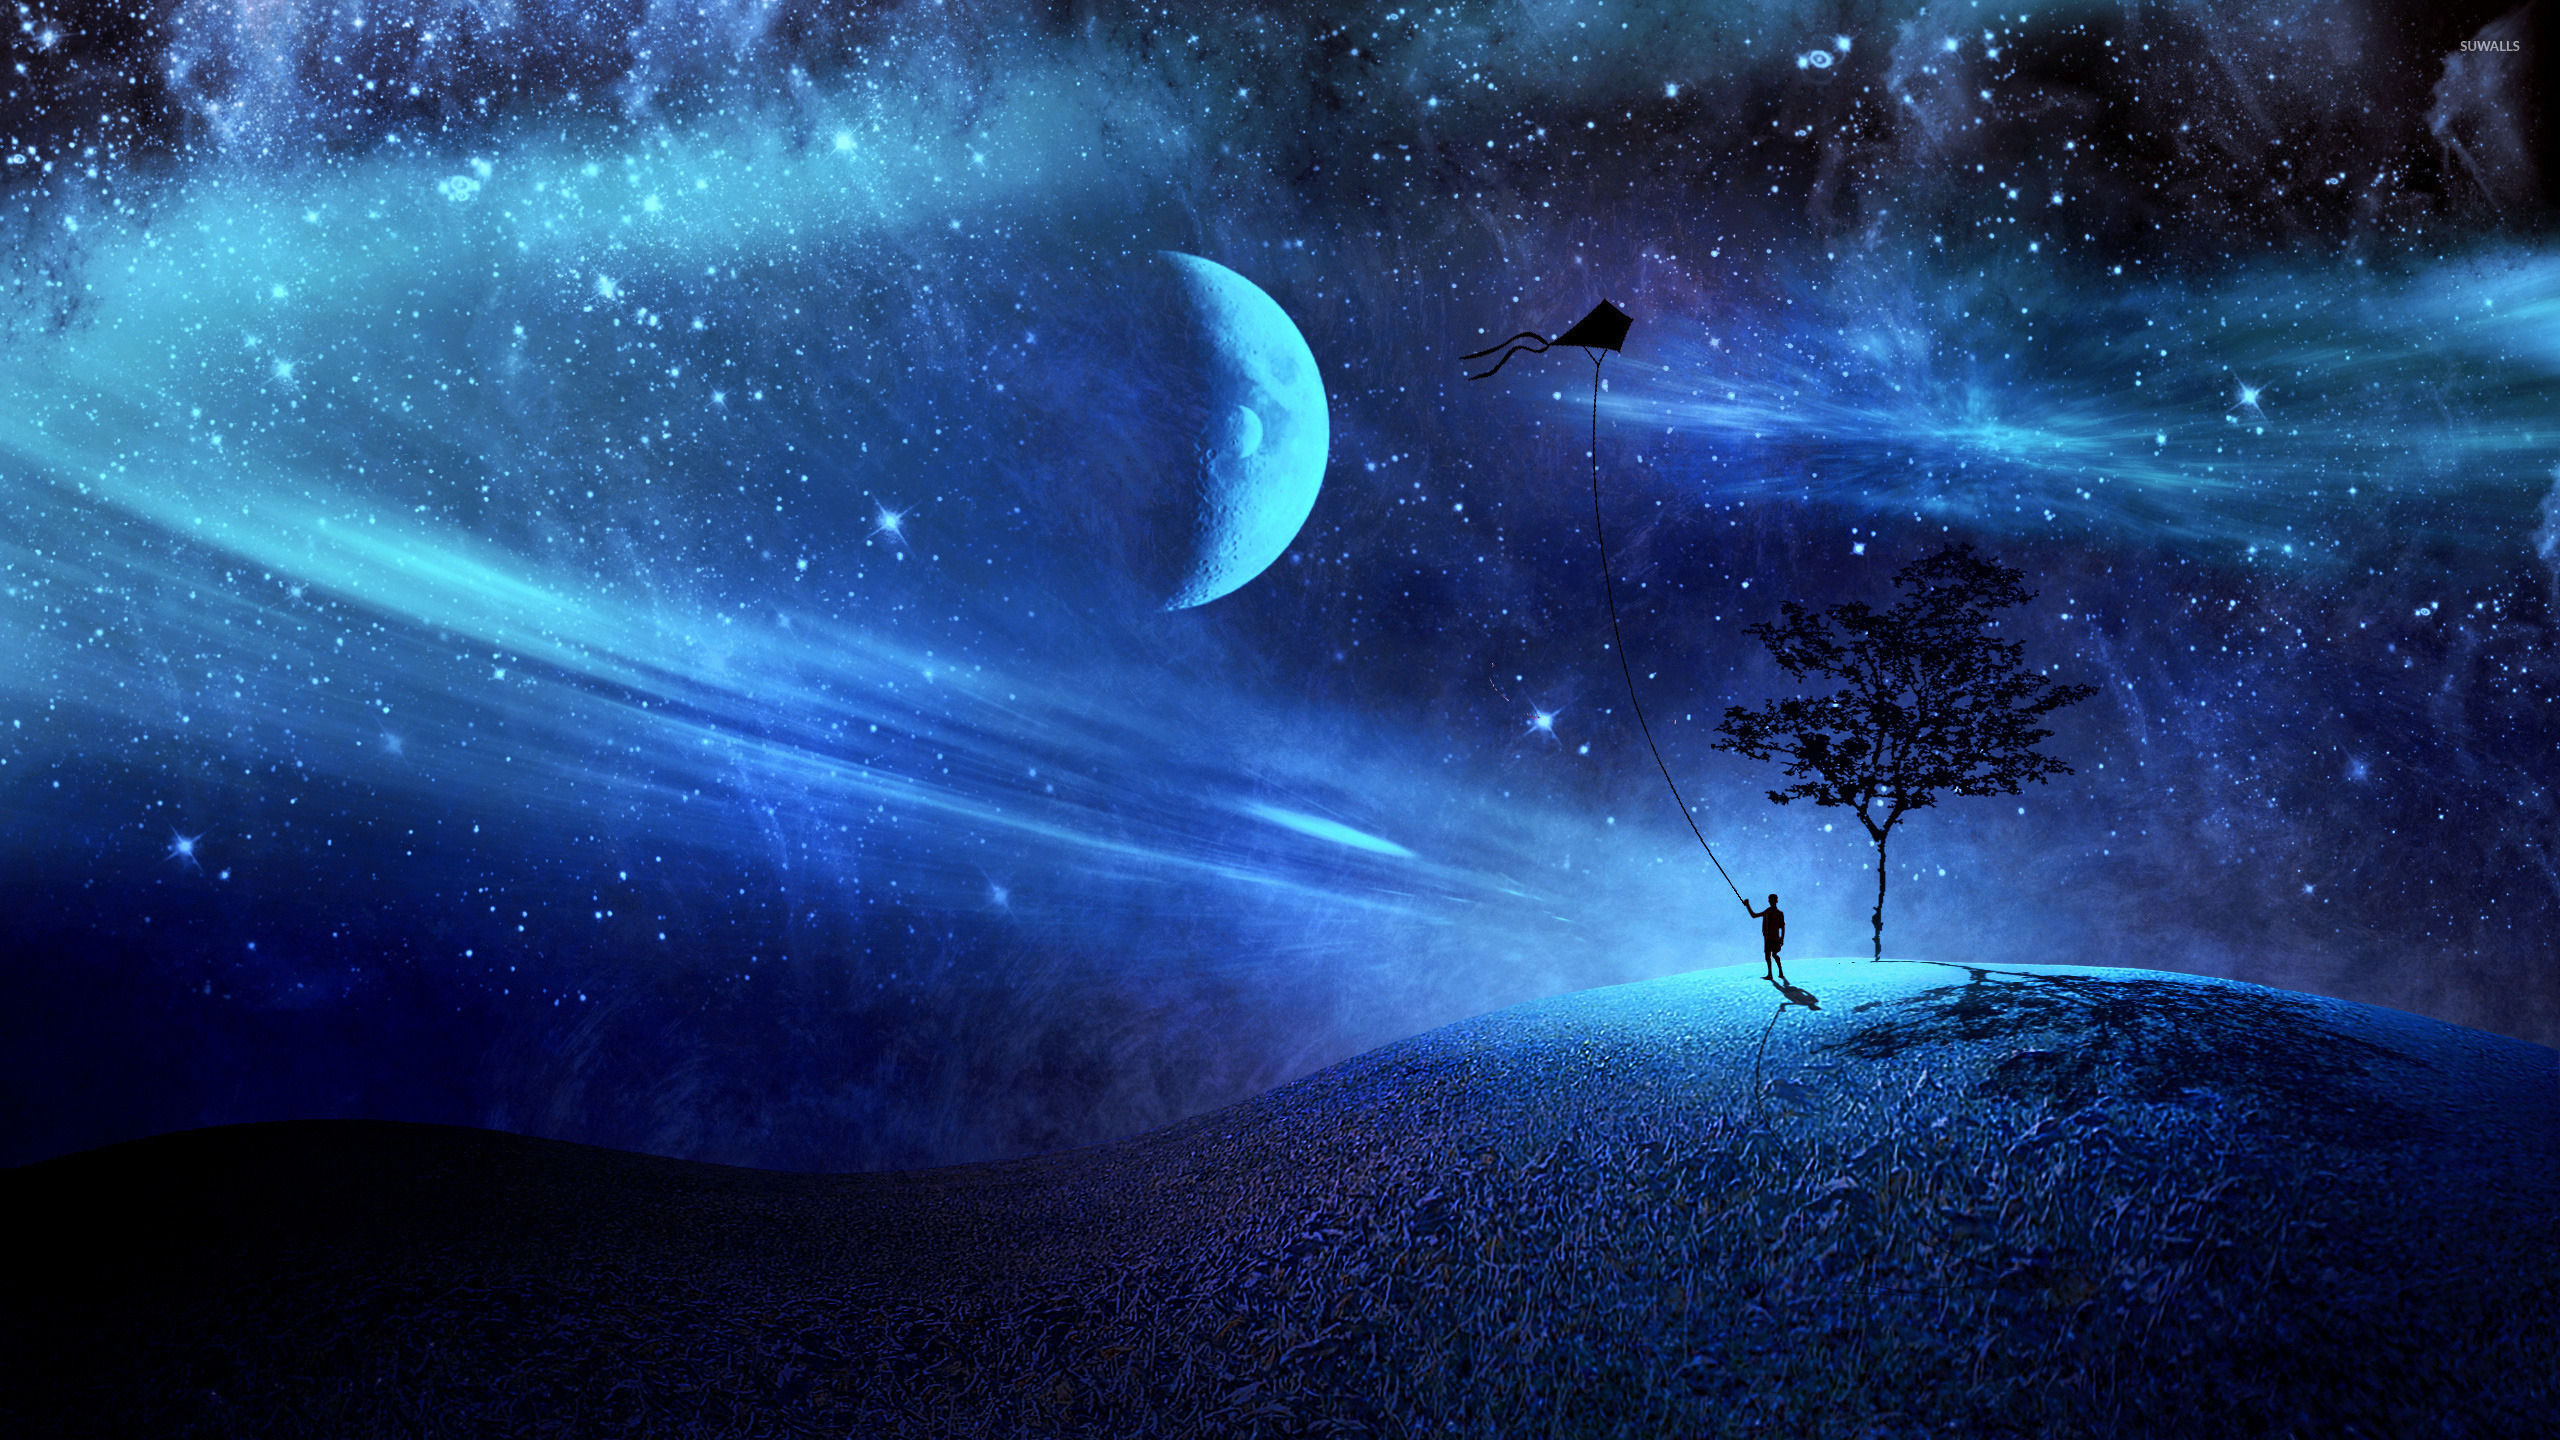 Boy with his kite in a blue night wallpaper